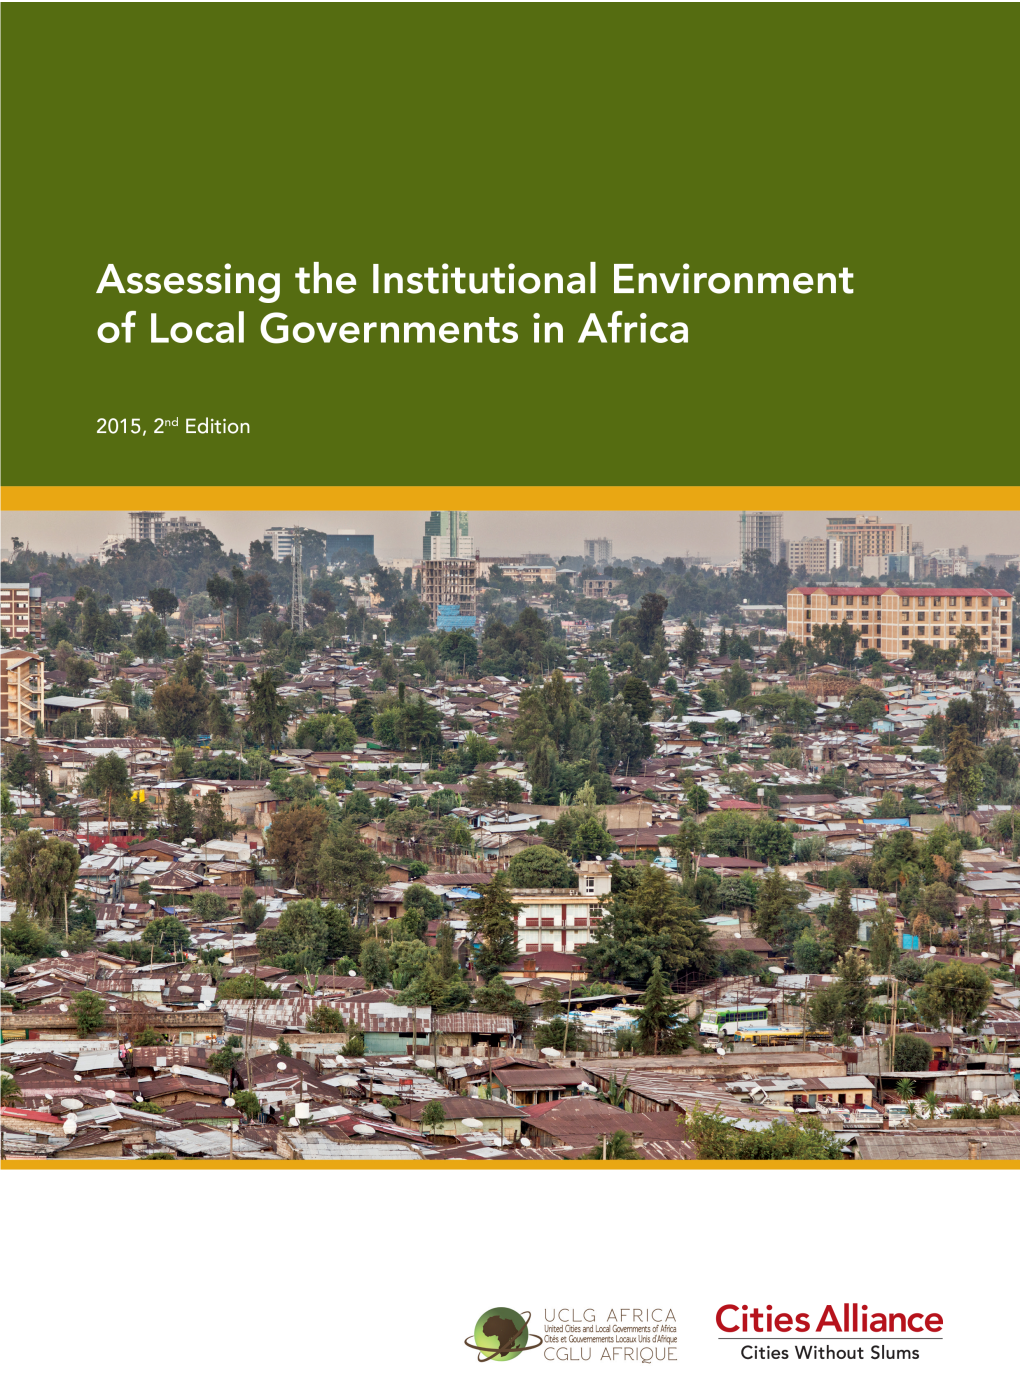 Assessing the Institutional Environment of LG in Africa